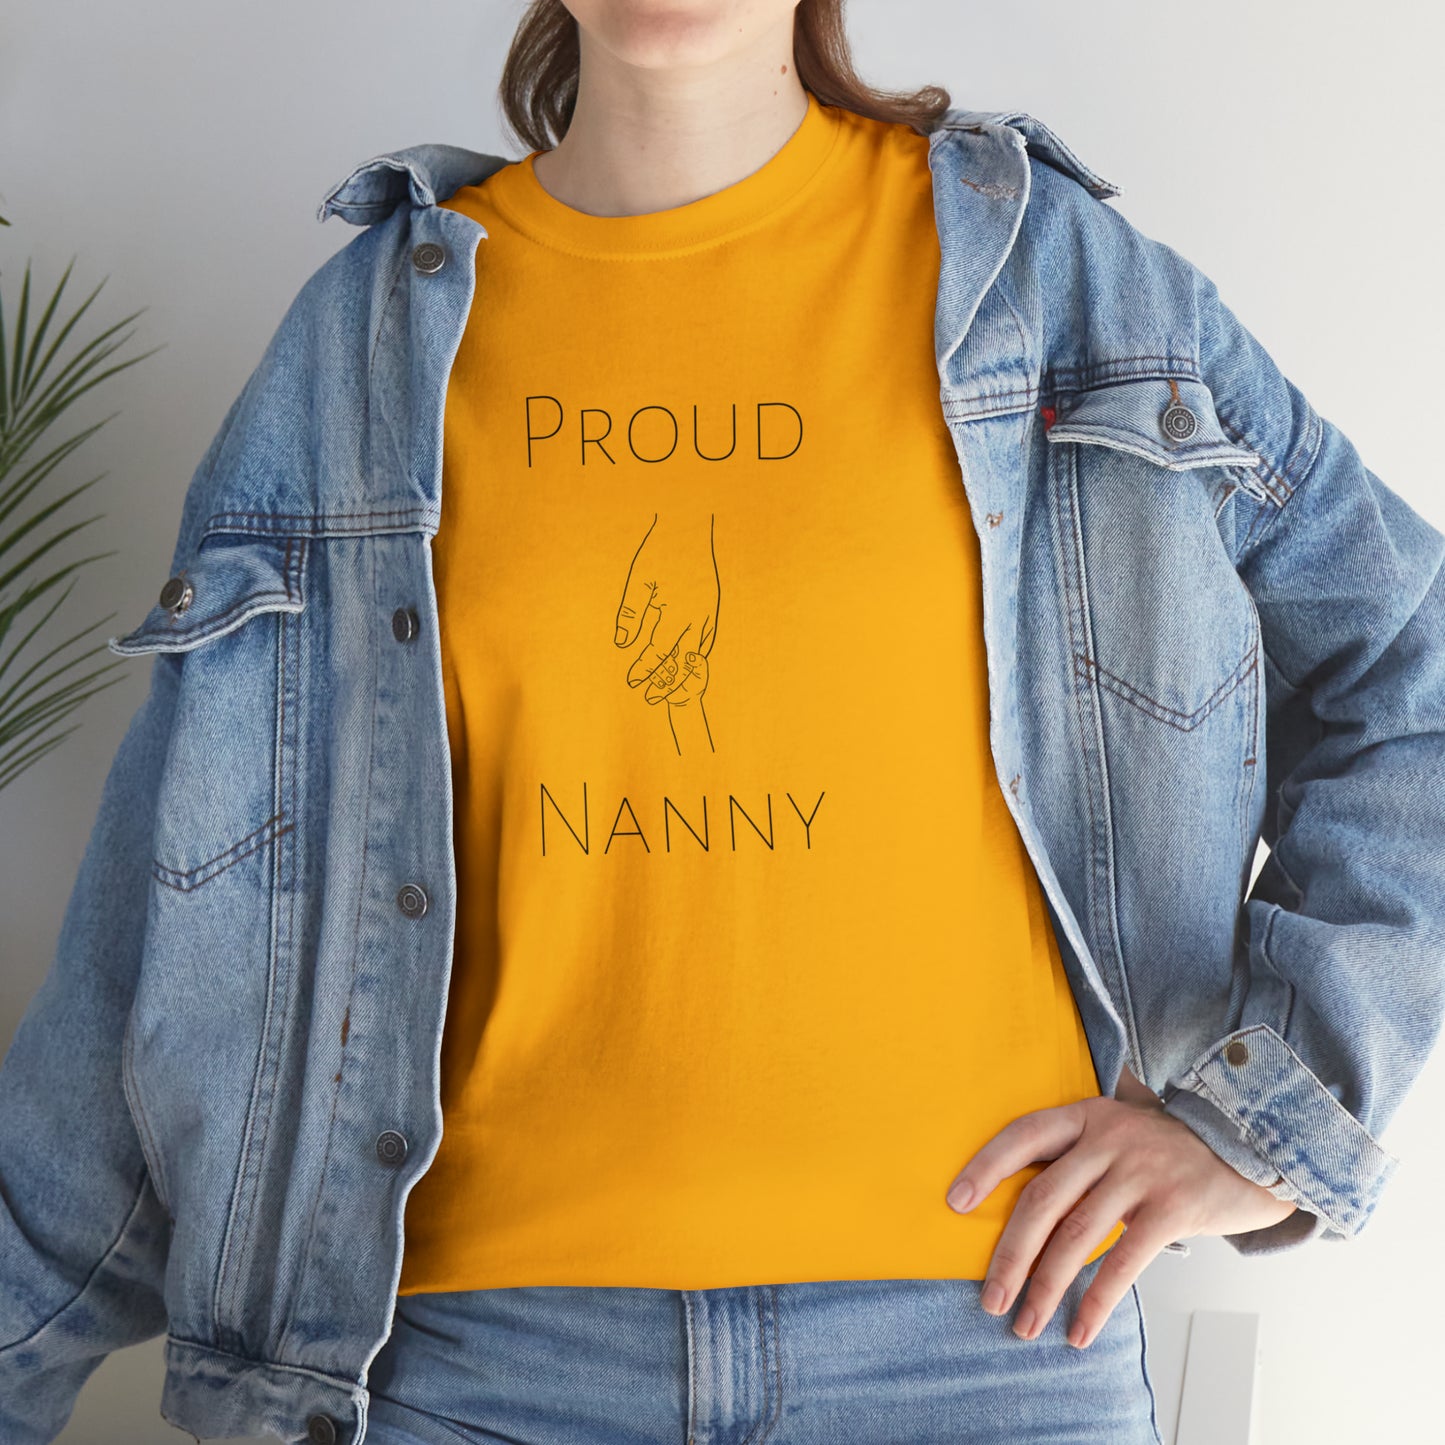 "Proud Nanny" T-Shirt - Weave Got Gifts - Unique Gifts You Won’t Find Anywhere Else!